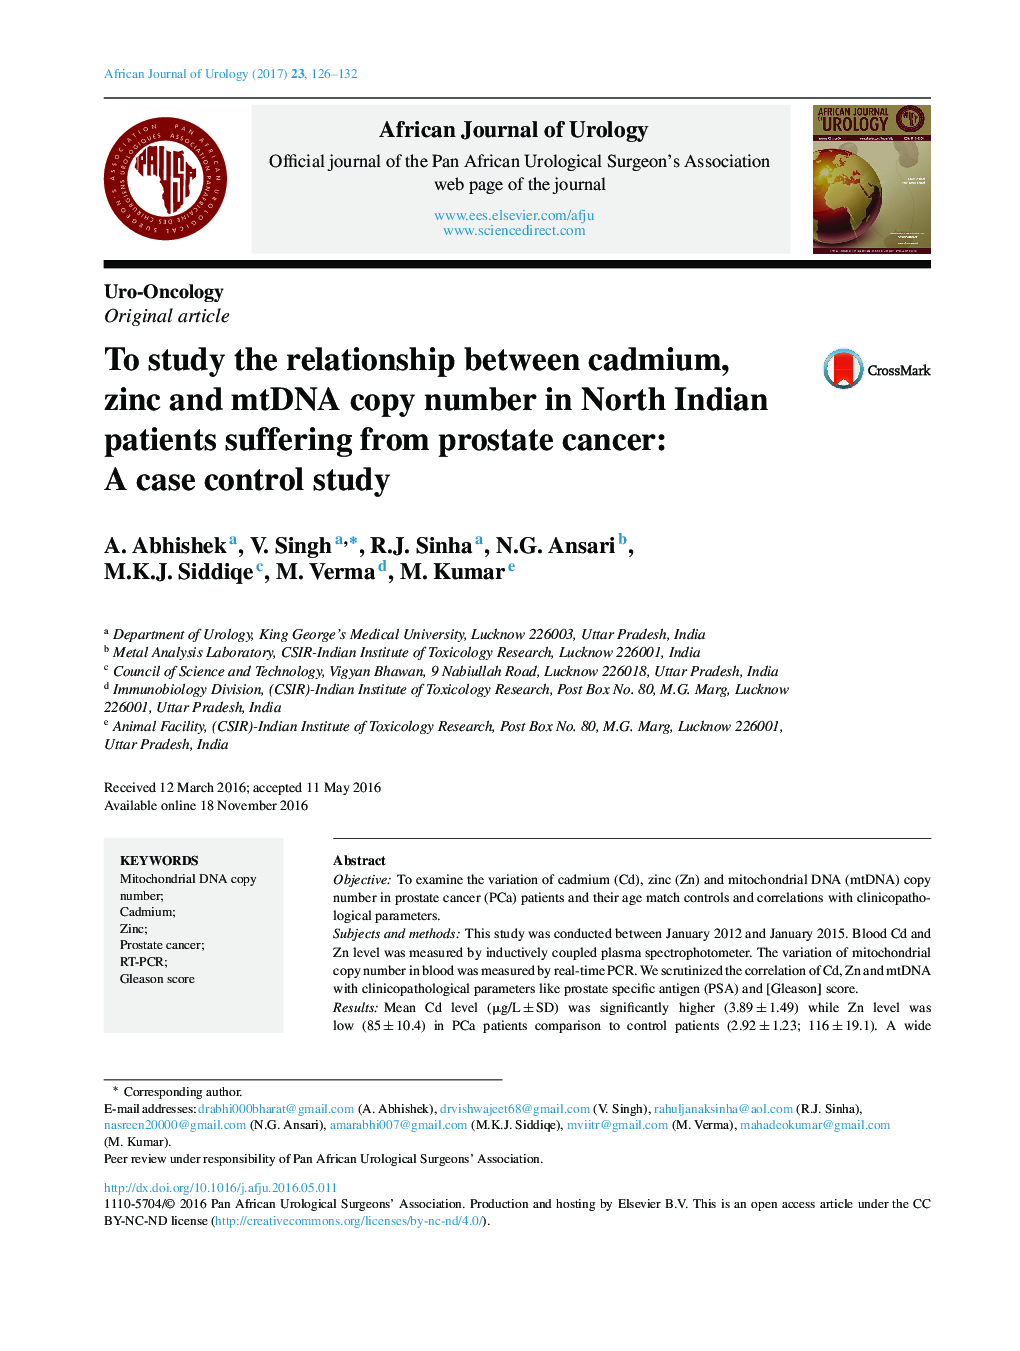 Uro-OncologyOriginal articleTo study the relationship between cadmium, zinc and mtDNA copy number in North Indian patients suffering from prostate cancer: A case control study